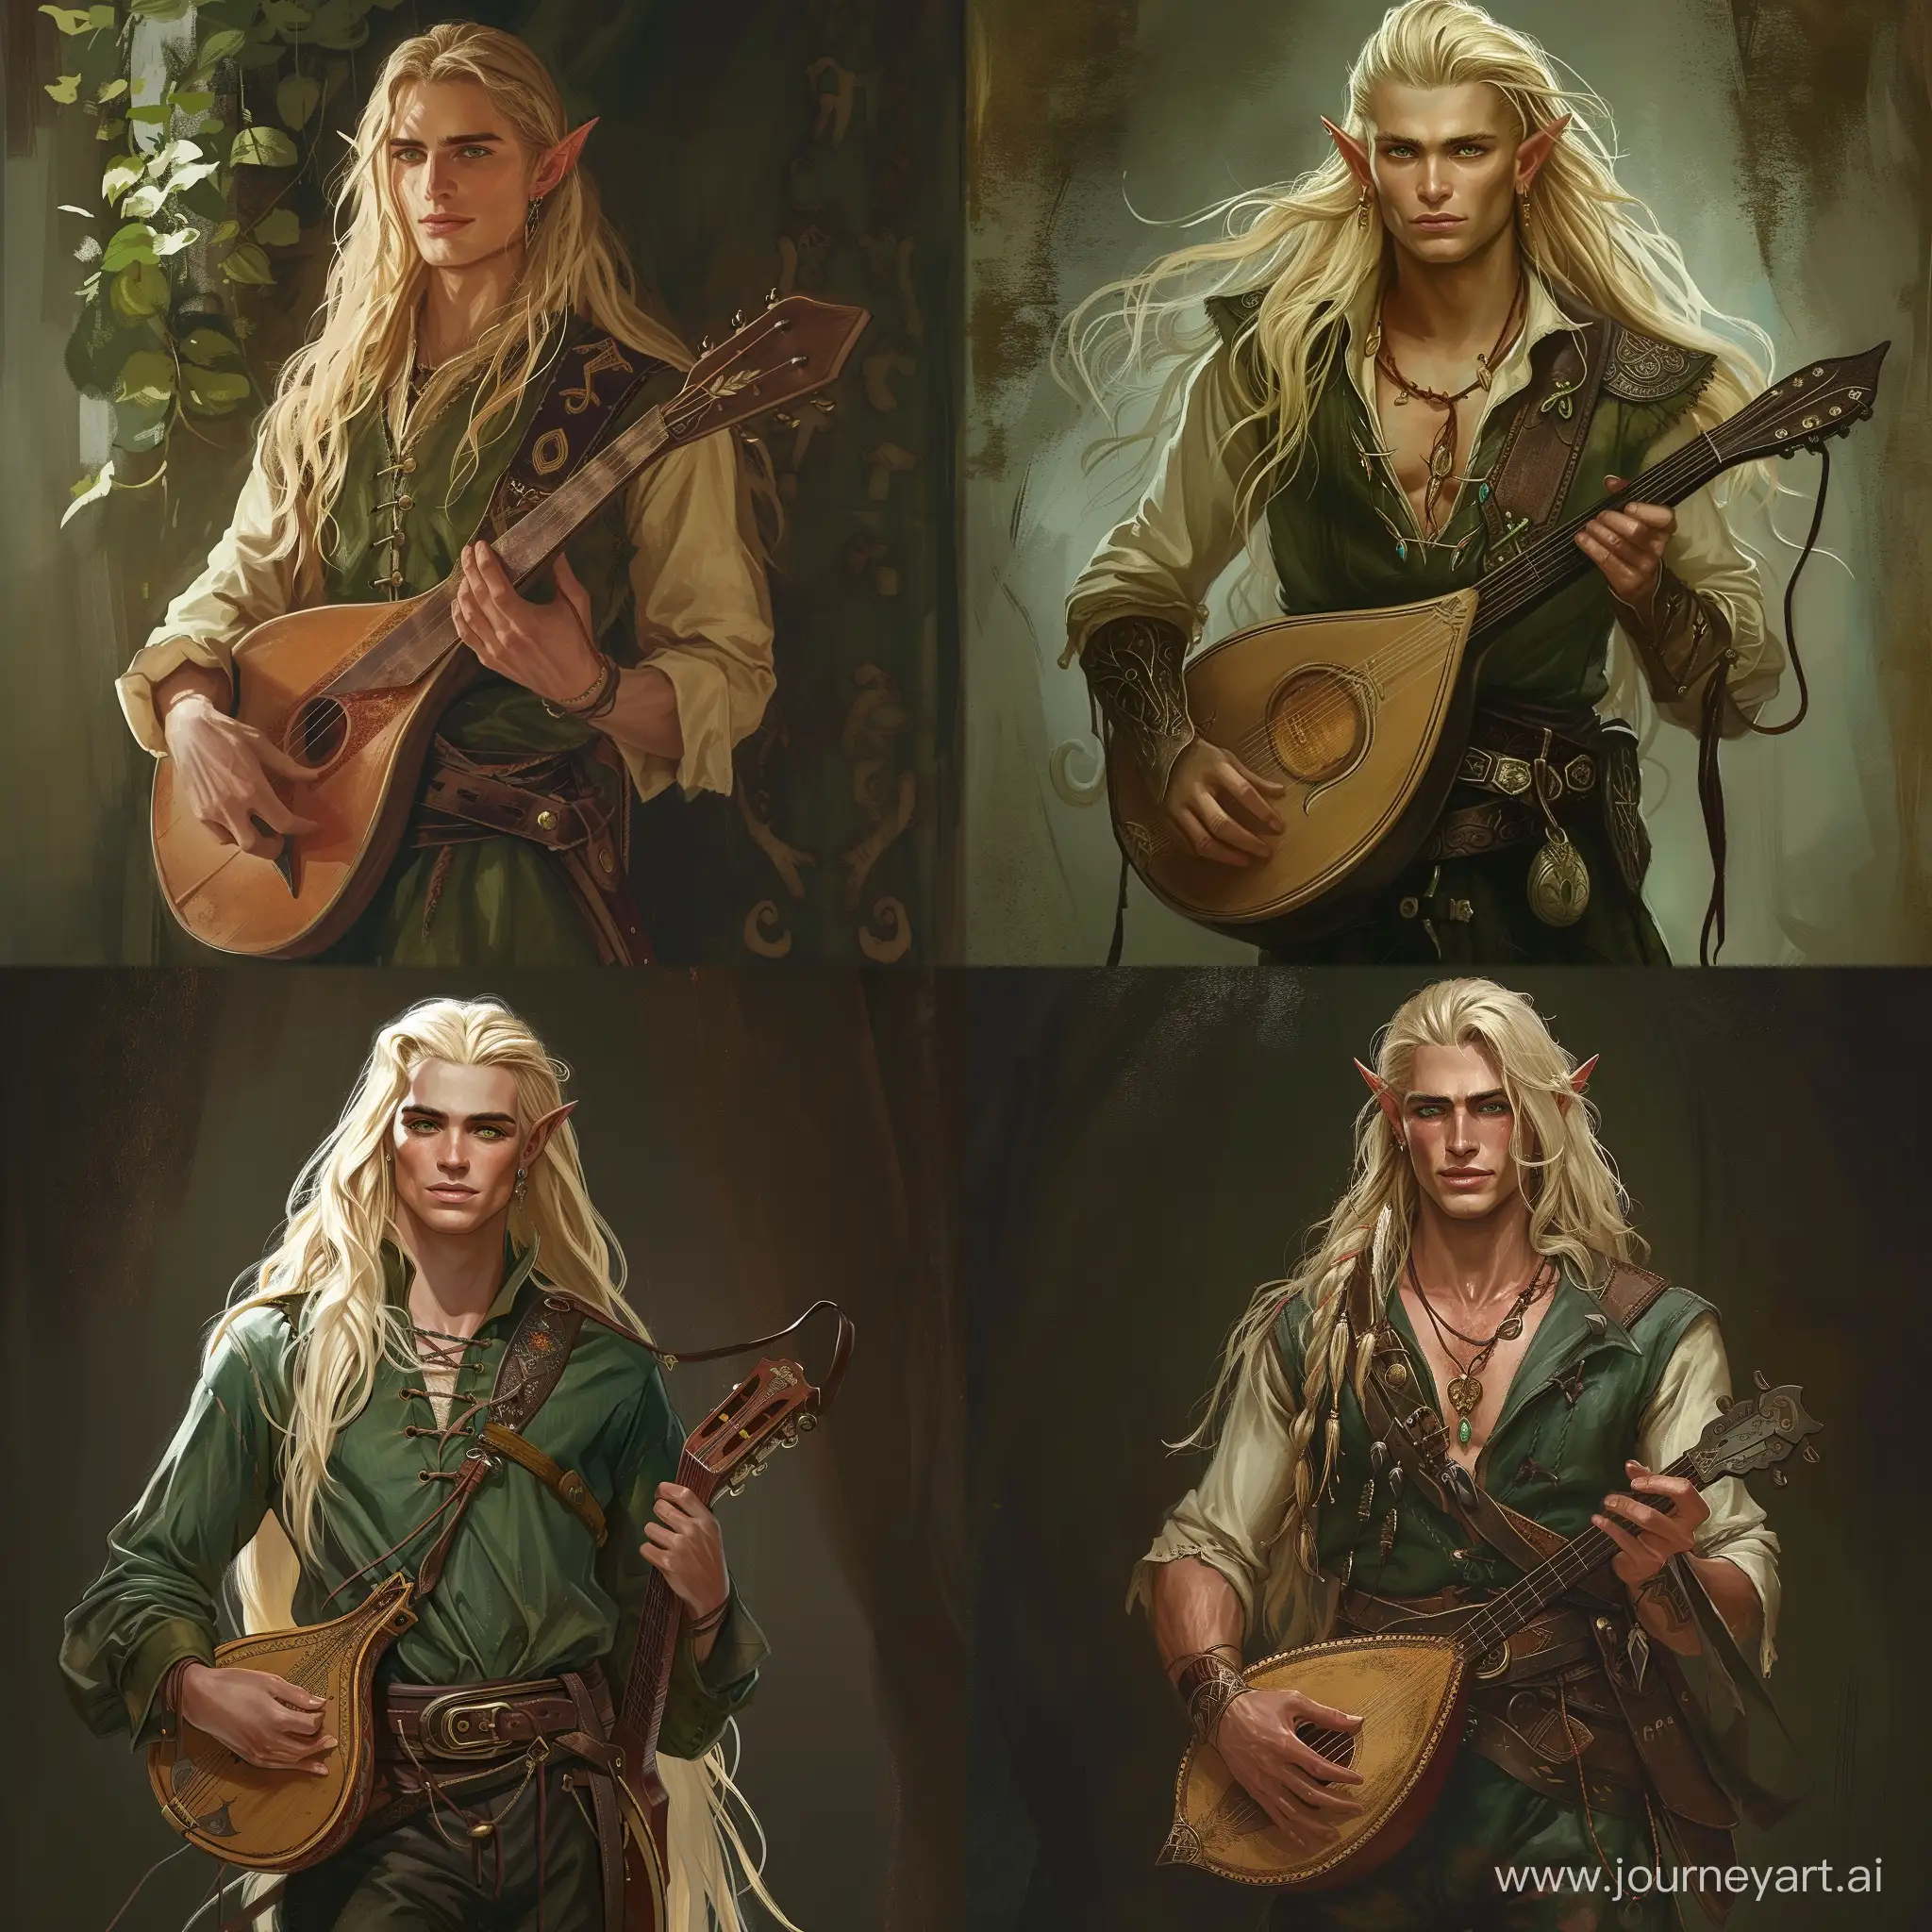 make a half-elf man of 23 years old with blonde long hair, short stature, with green eyes and a lute on his belt in the style of magic and Scandinavia